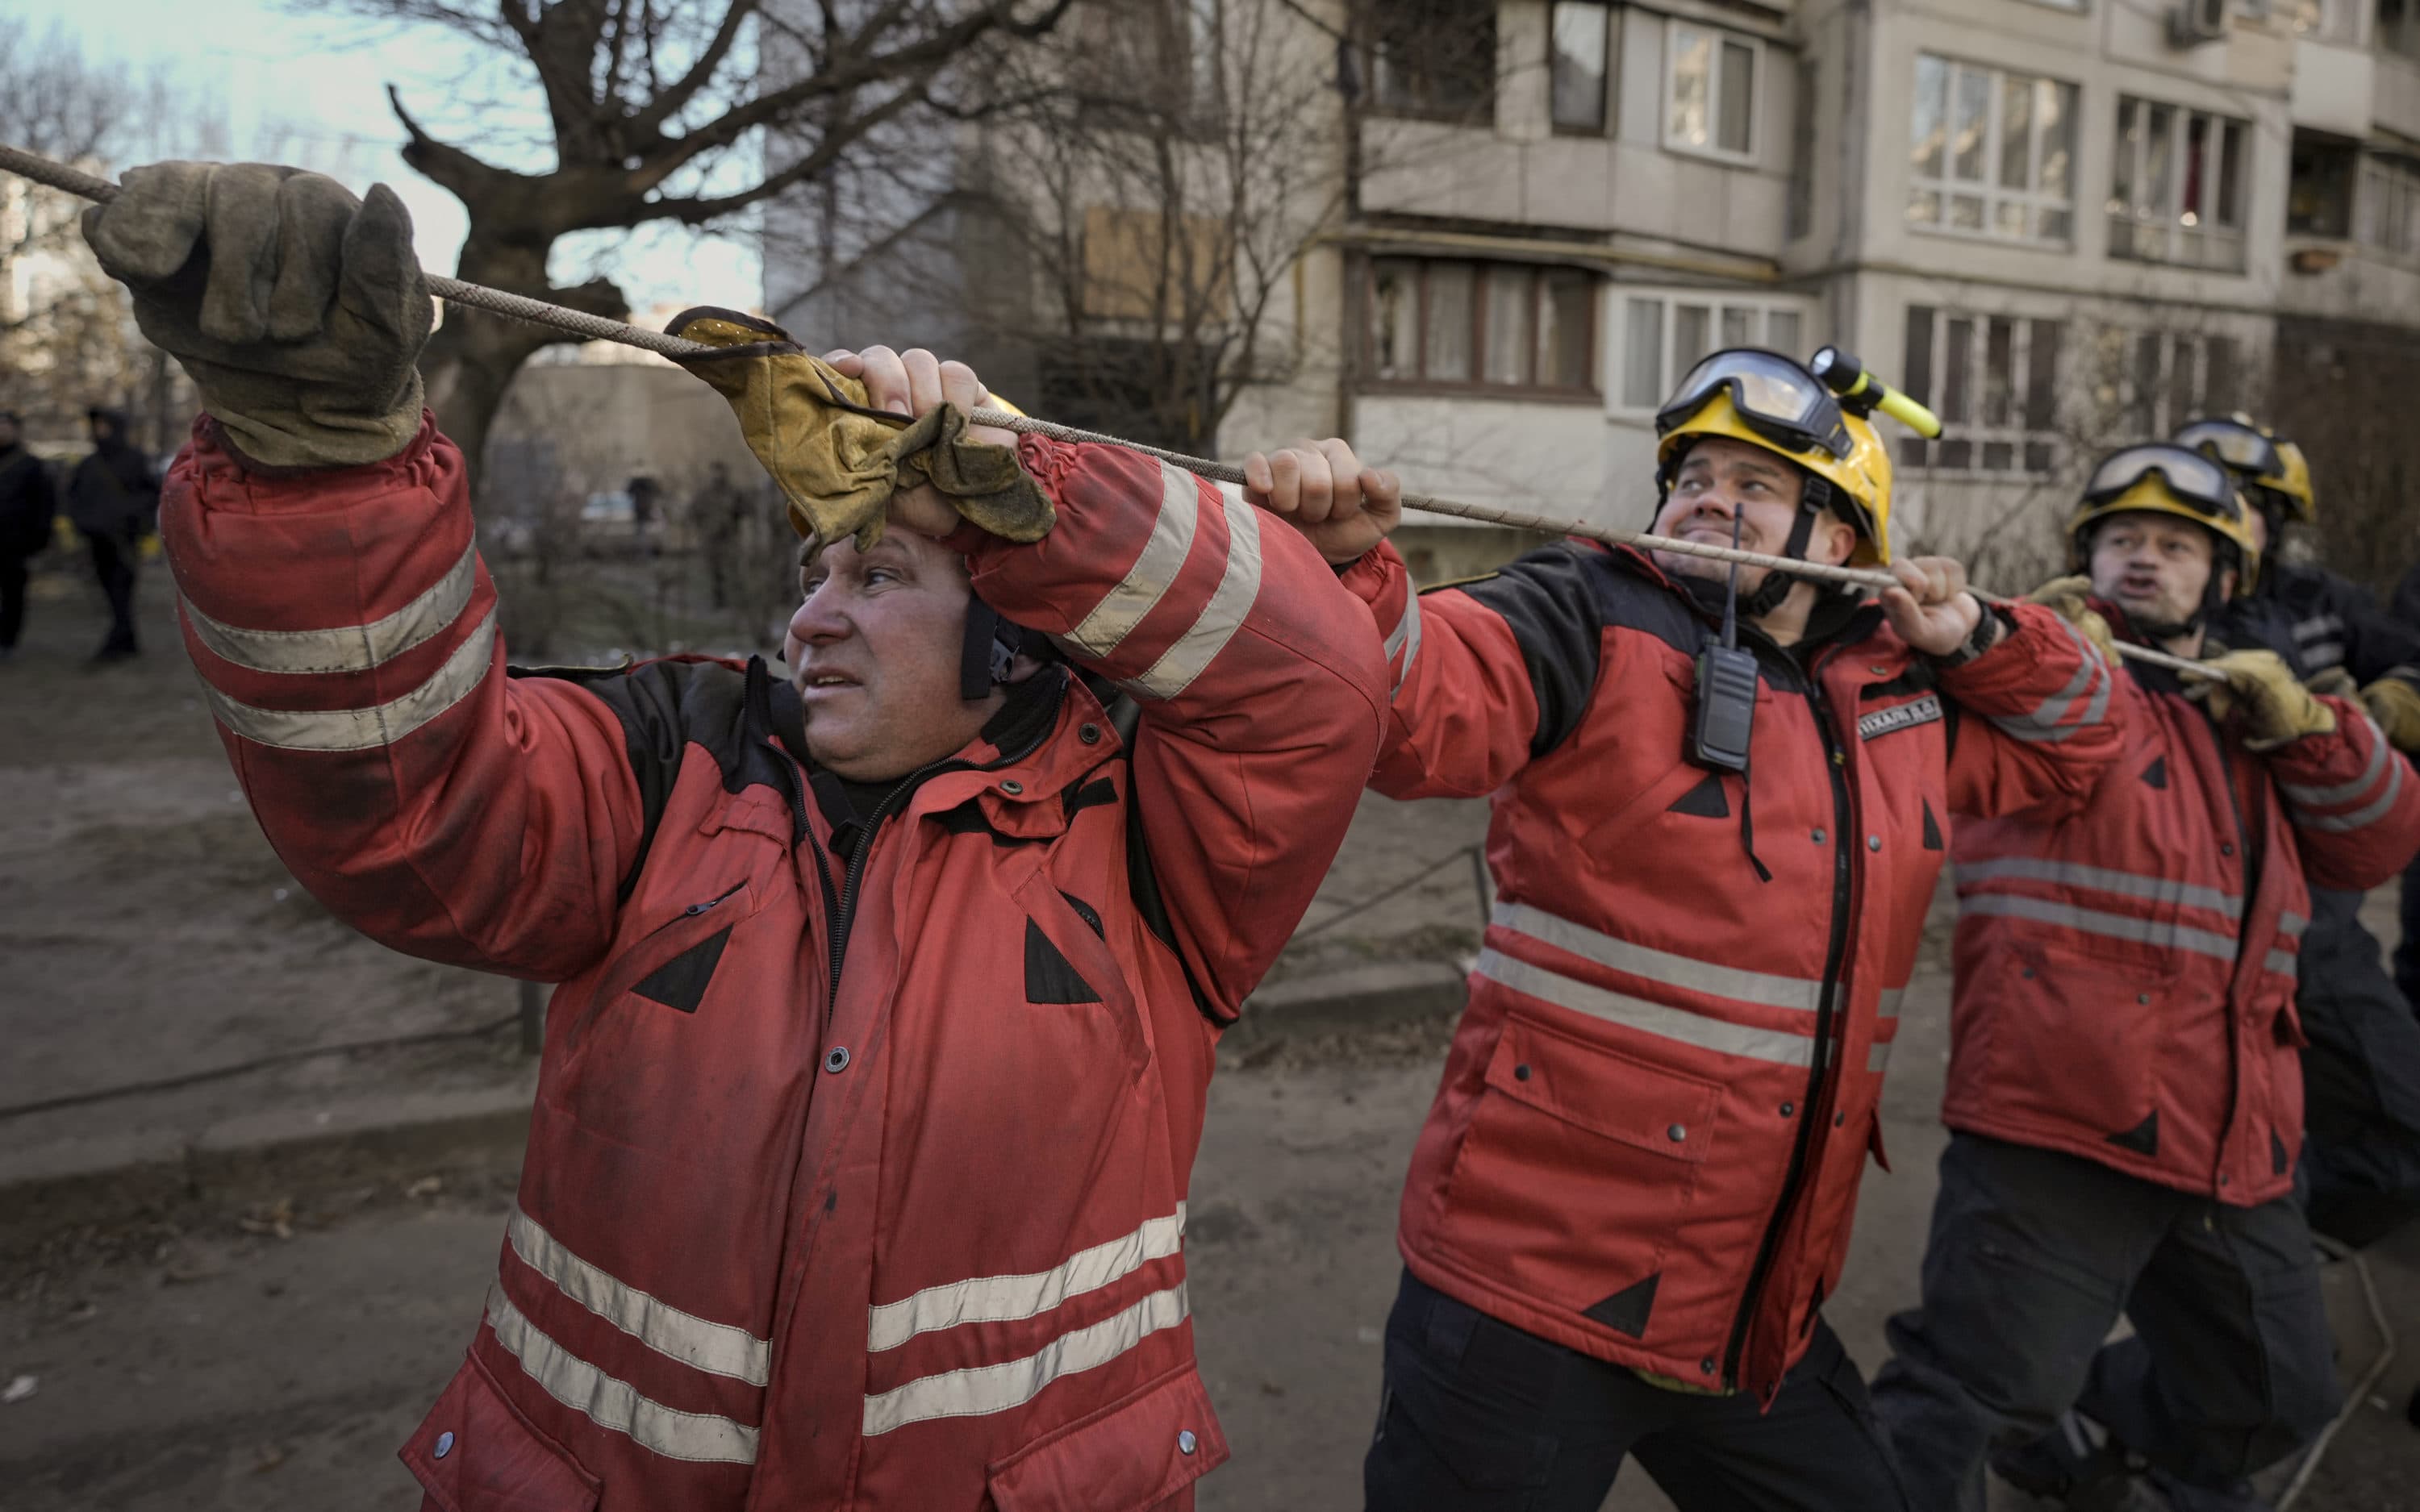 Firefighters pull a rope to direct the fall of a tree while working to extinguish a blaze in a destroyed apartment building after a bombing in a residential area in Kyiv, Ukraine, Tuesday, March 15, 2022. (Vadim Ghirda/AP)